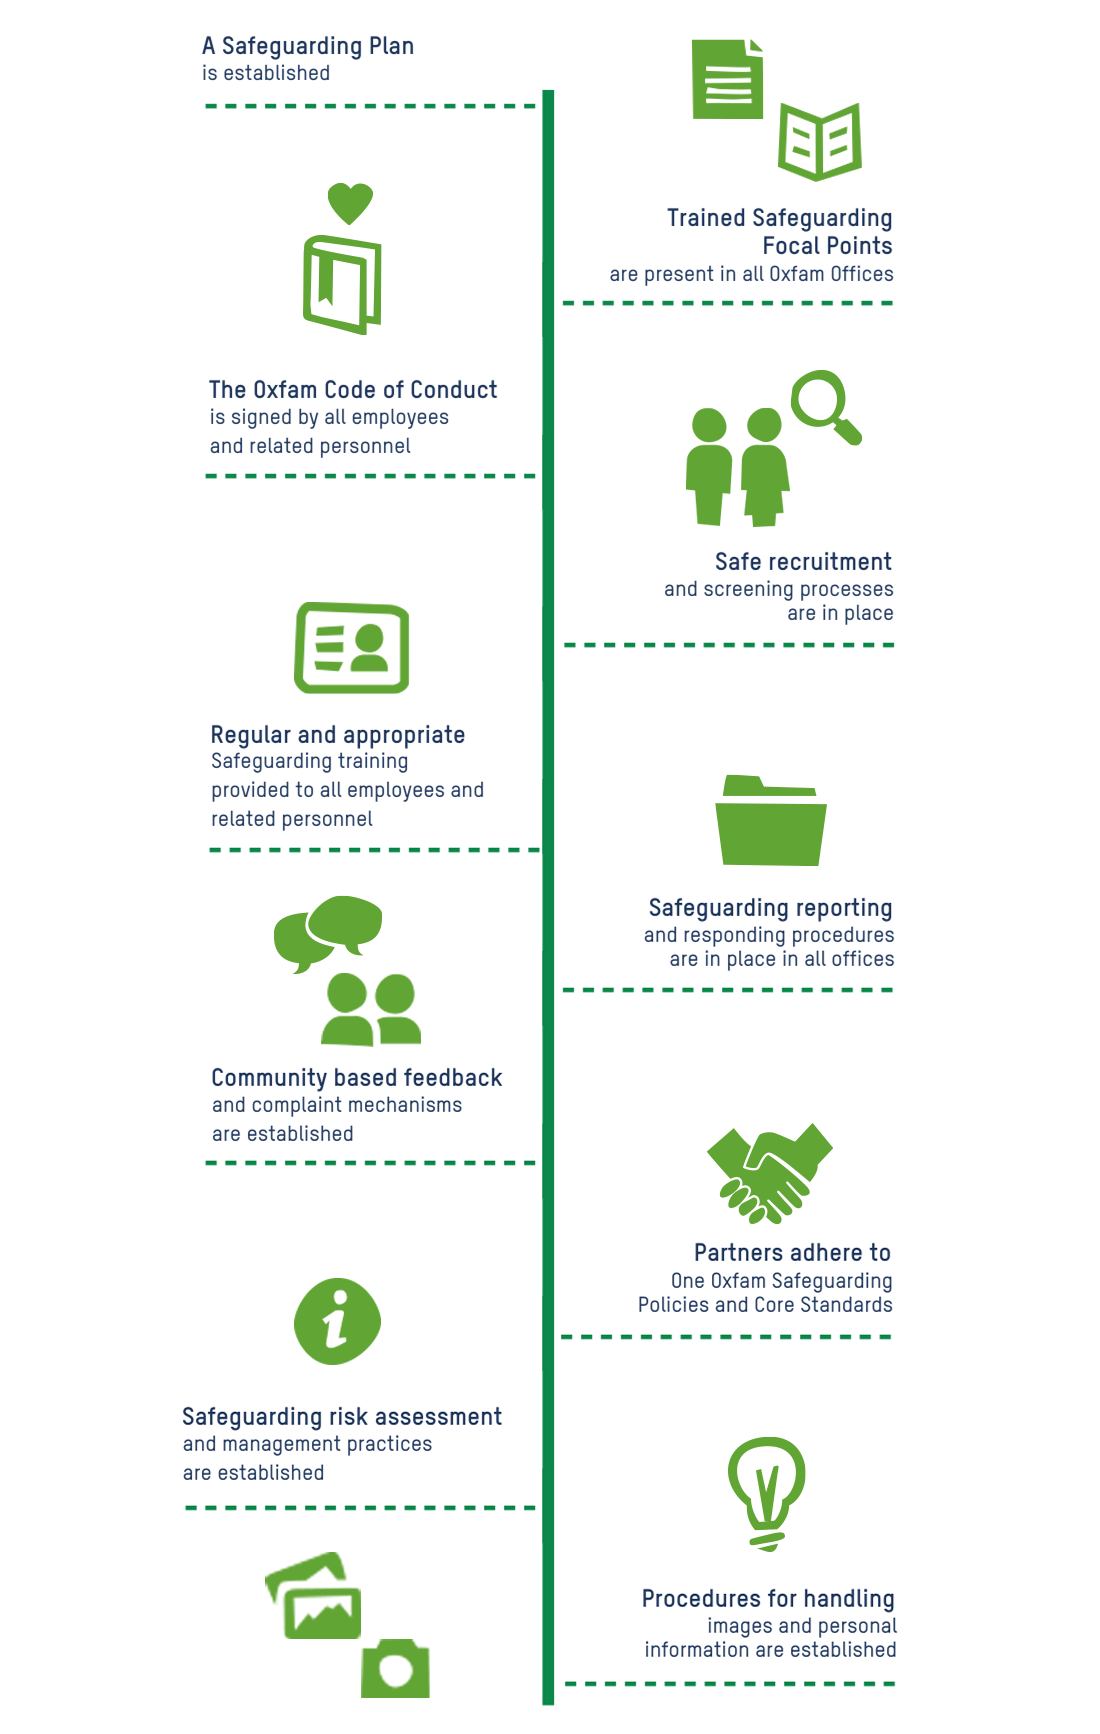 This graphic outlines all of the planning, processes and practices that Oxfam Canada undertakes to ensure safeguarding within the confederation, including safeguarding plans, training, codes of conduct, safe recruitment, reporting, standards, risk assessments and procedures for sensitive information